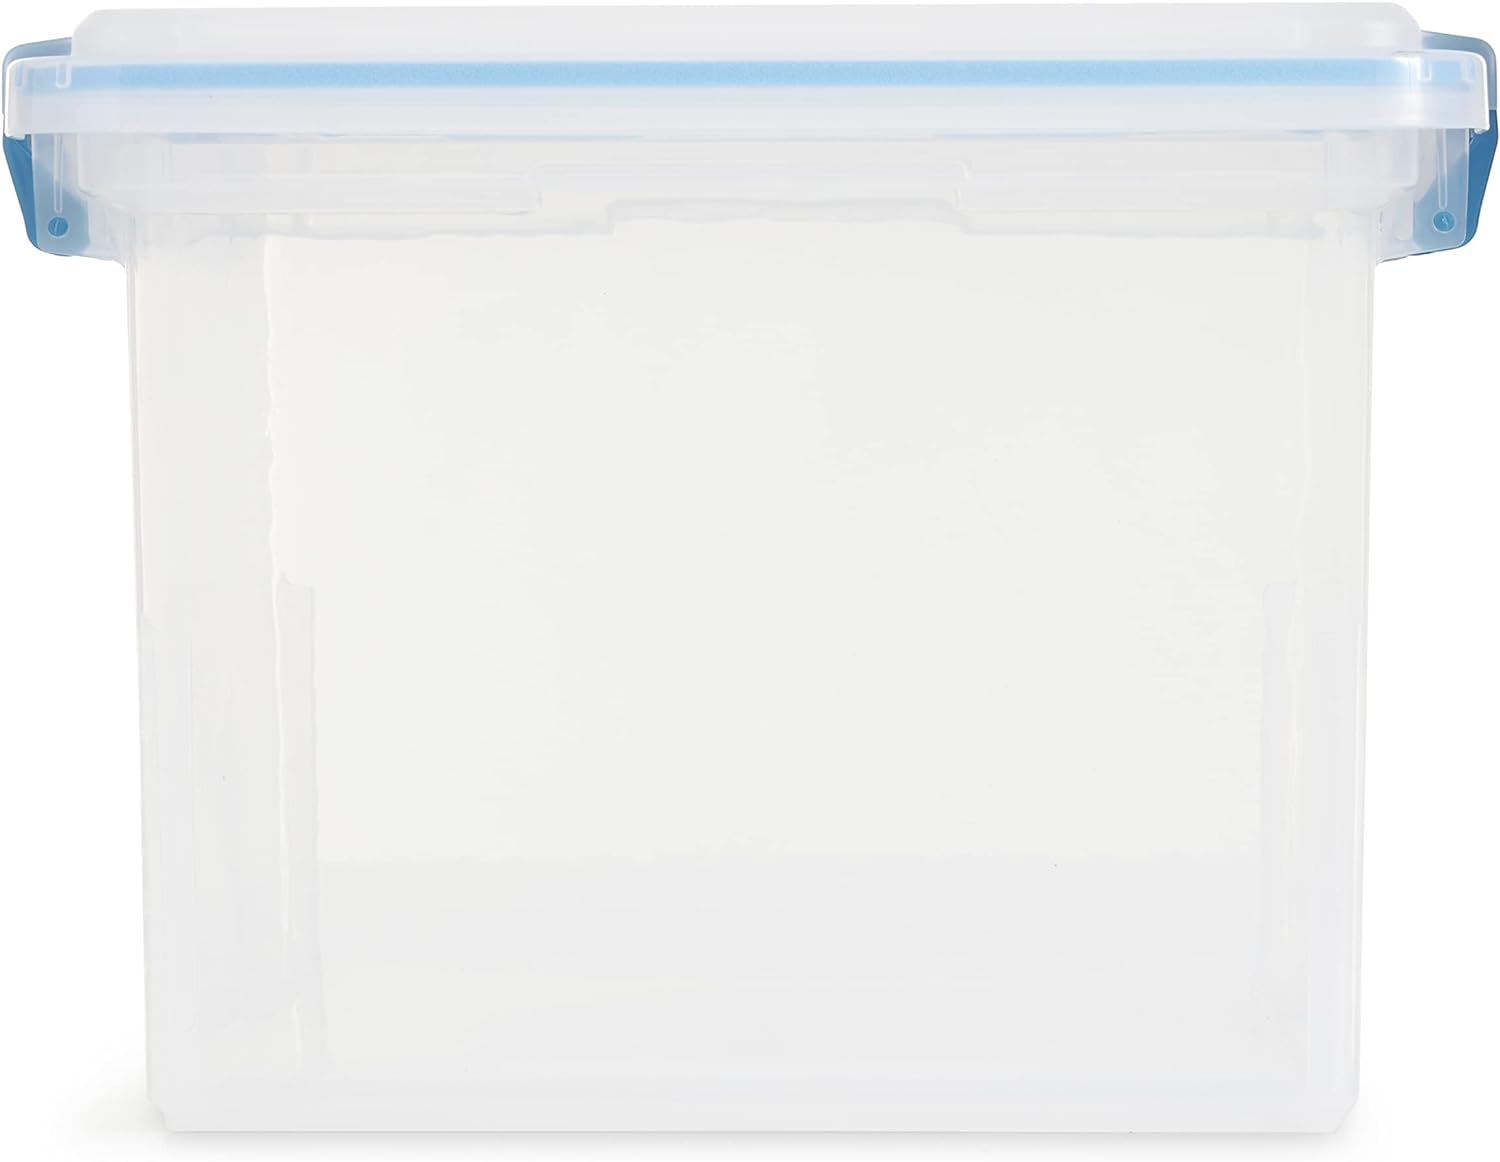 https://discounttoday.net/wp-content/uploads/2023/10/Sterilite-32-Quart-Stackable-Clear-Plastic-Storage-Tote-Container-with-Blue-Gasket-Latching-Lid-for-Home-and-Office-Organization-Clear-12-Pack-3.jpg